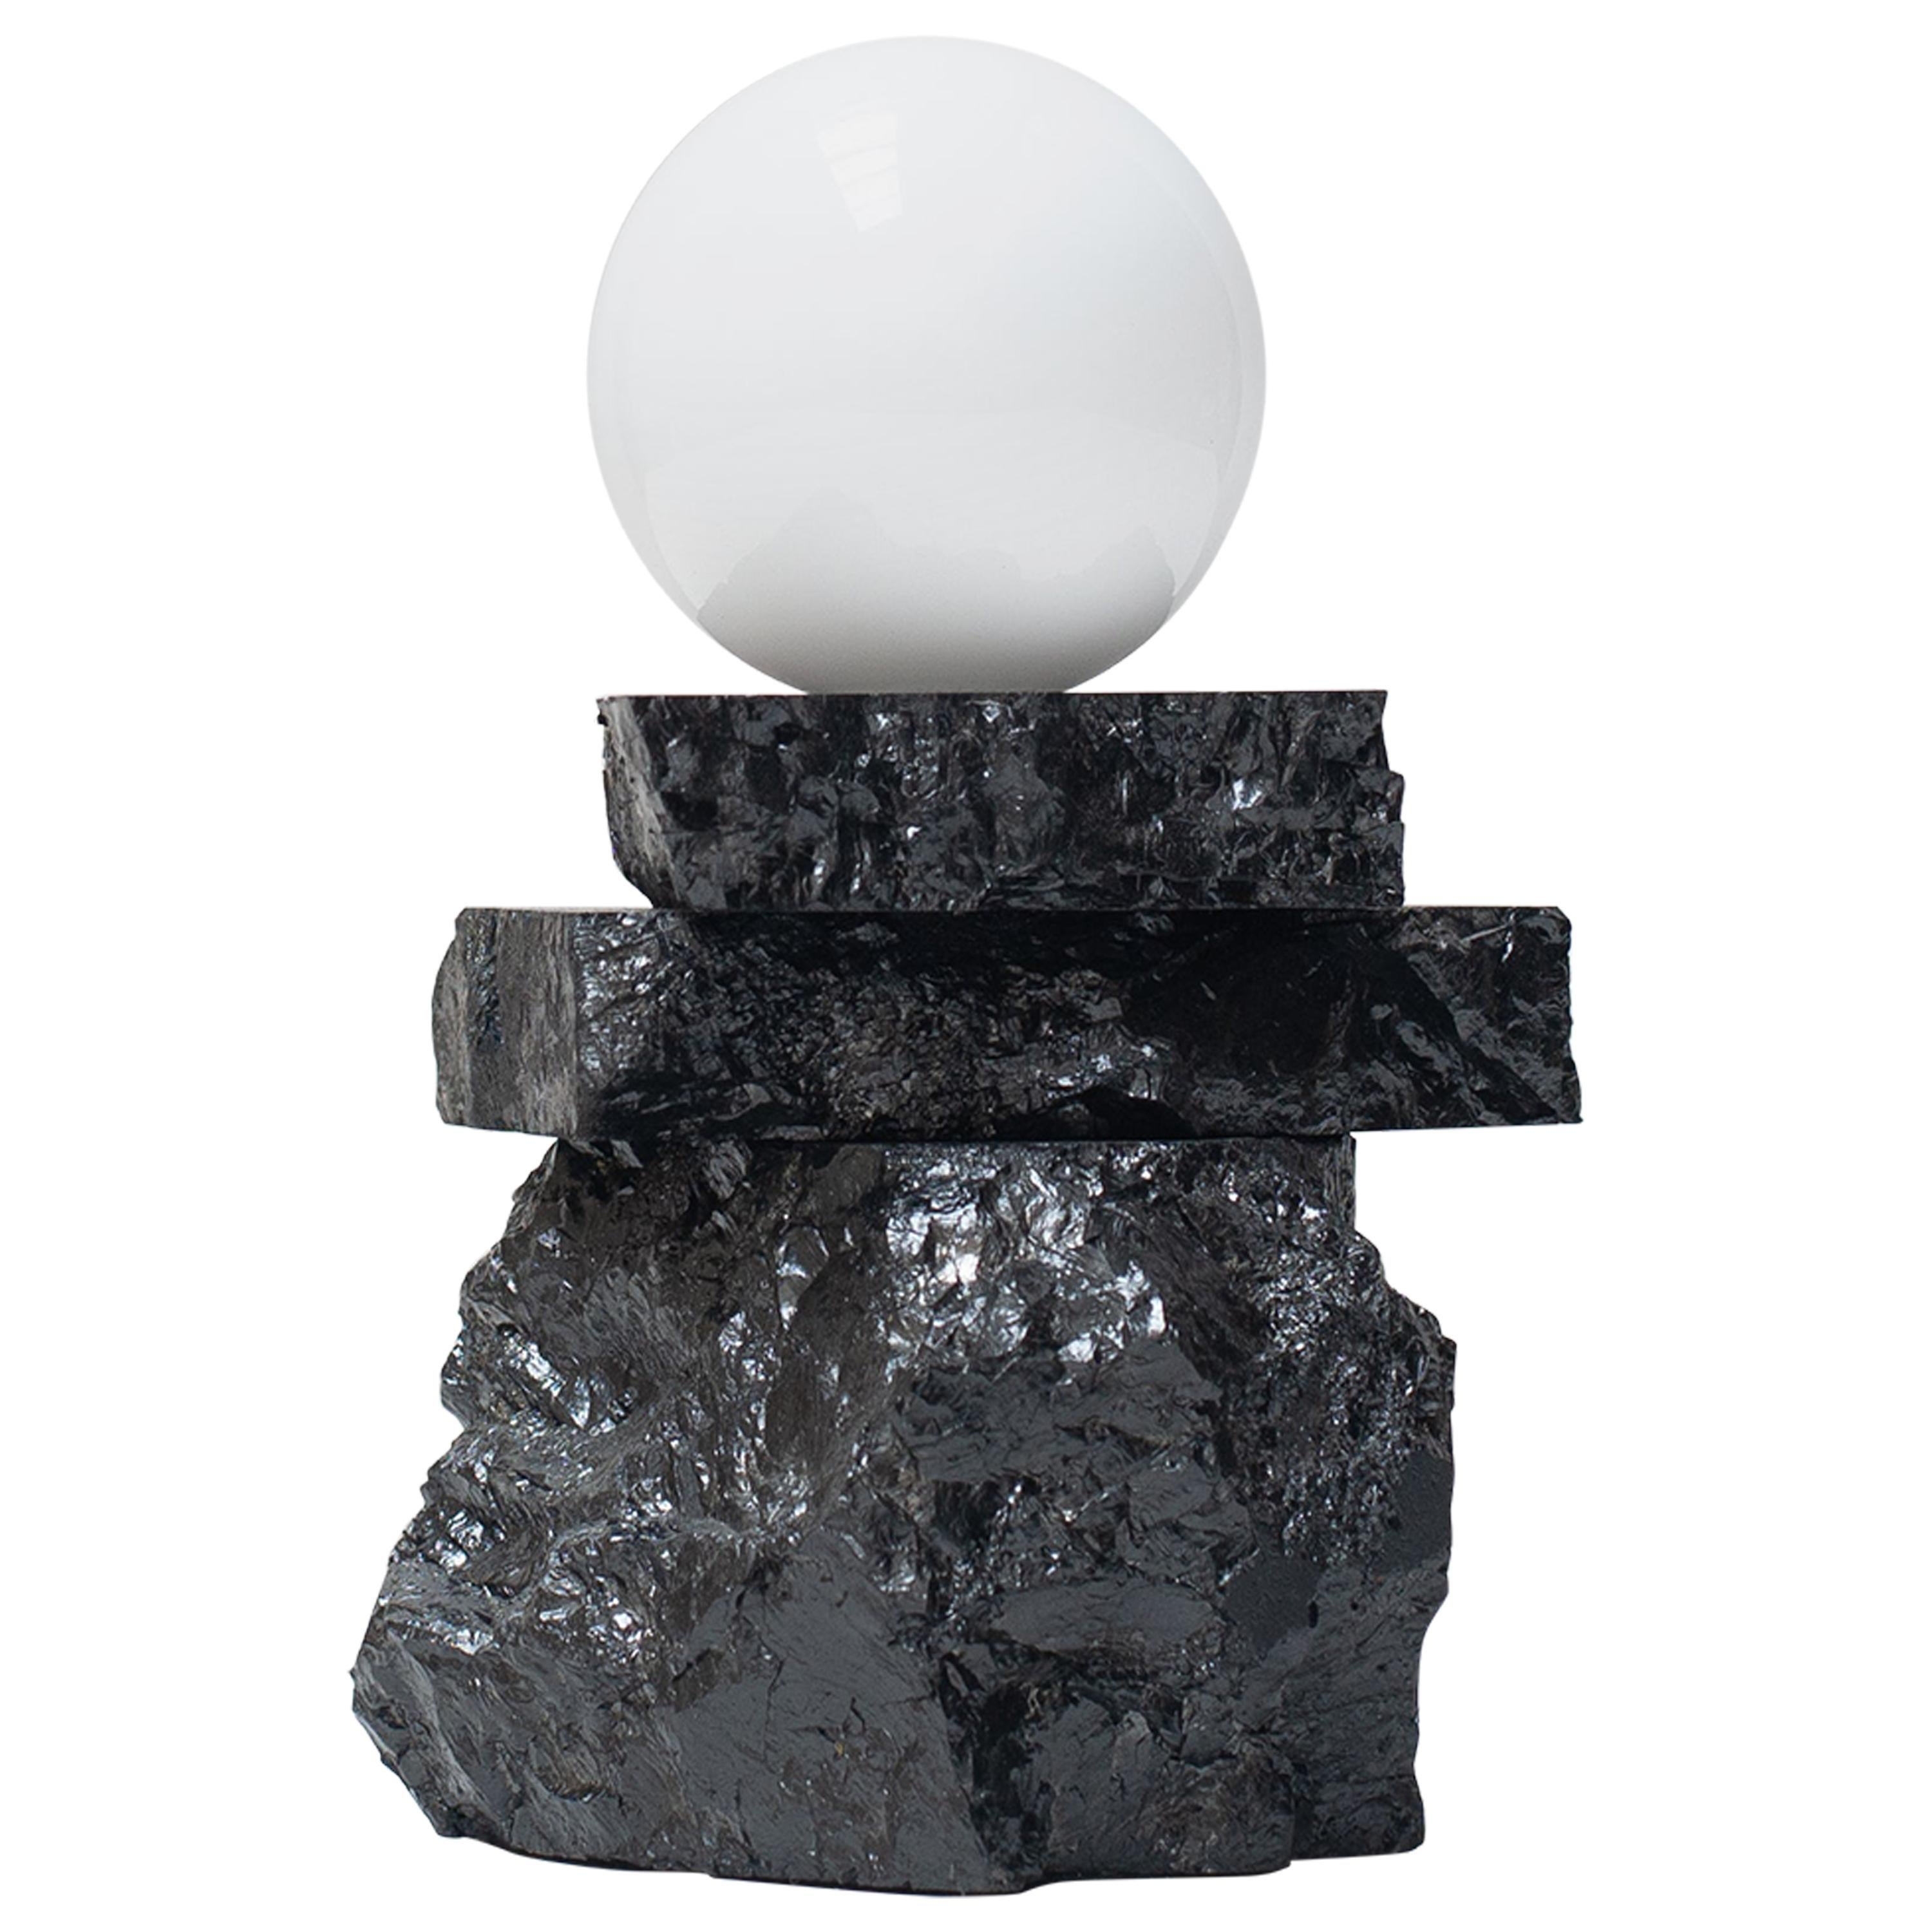 Anthracite Coal Table Light Contemporary Light